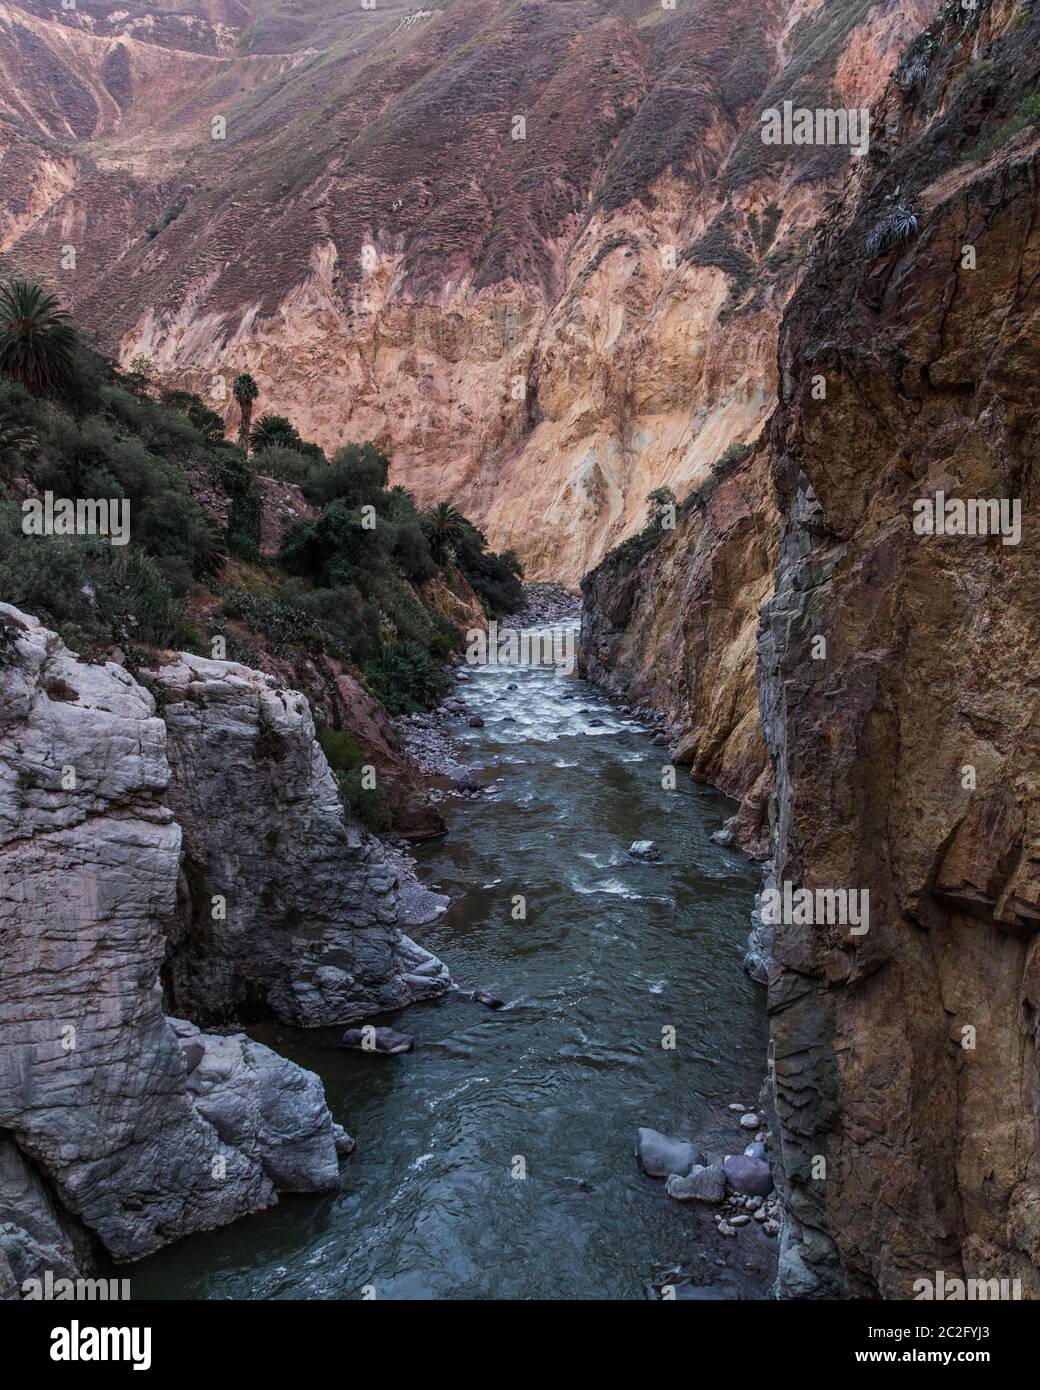 river in the middle of a canyon, grass ans trees, no people Stock Photo